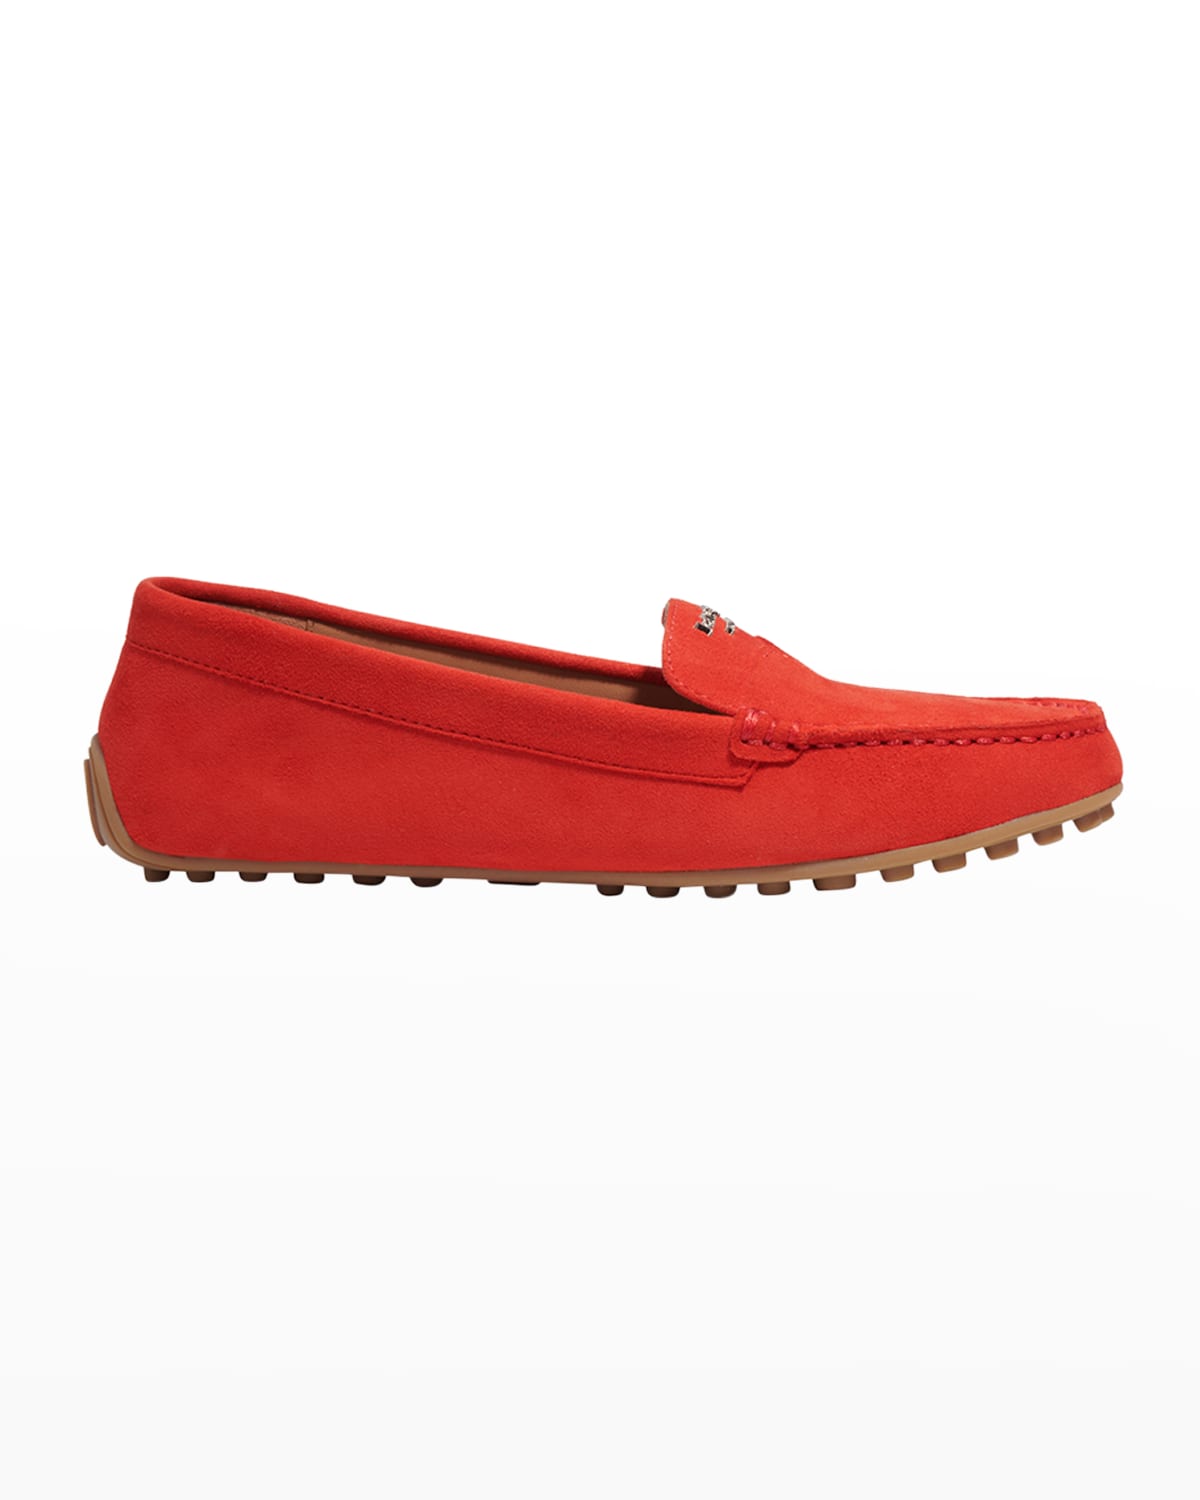 KATE SPADE DECK SUEDE DRIVER LOAFERS